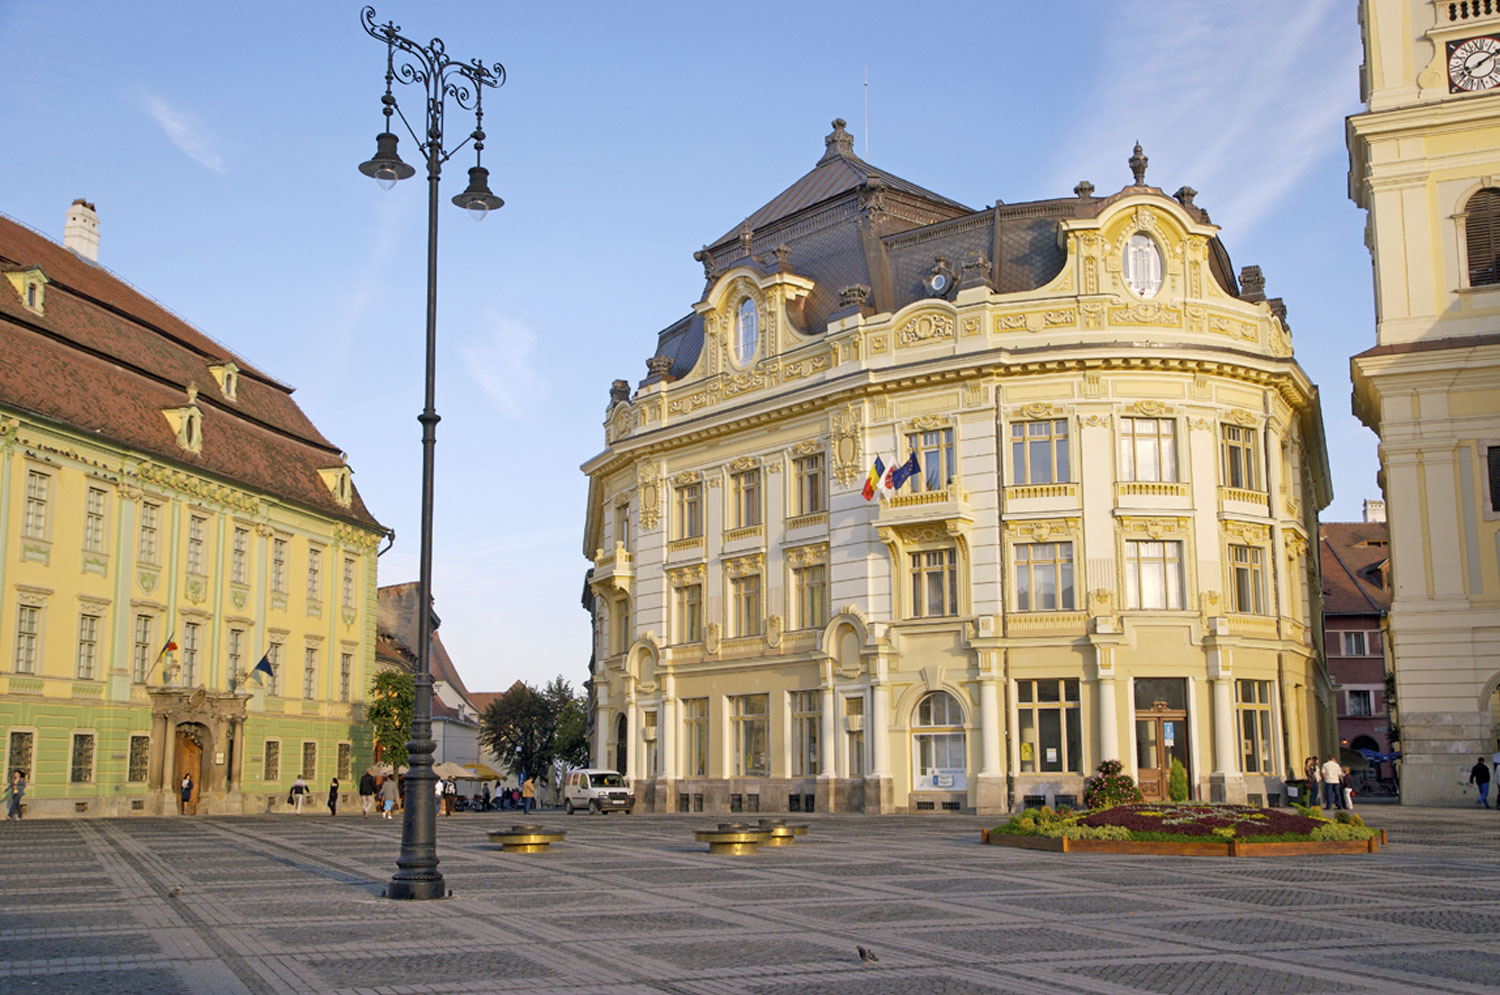 Pictures from Romania: a description of Sibiu, German Hermannstadt